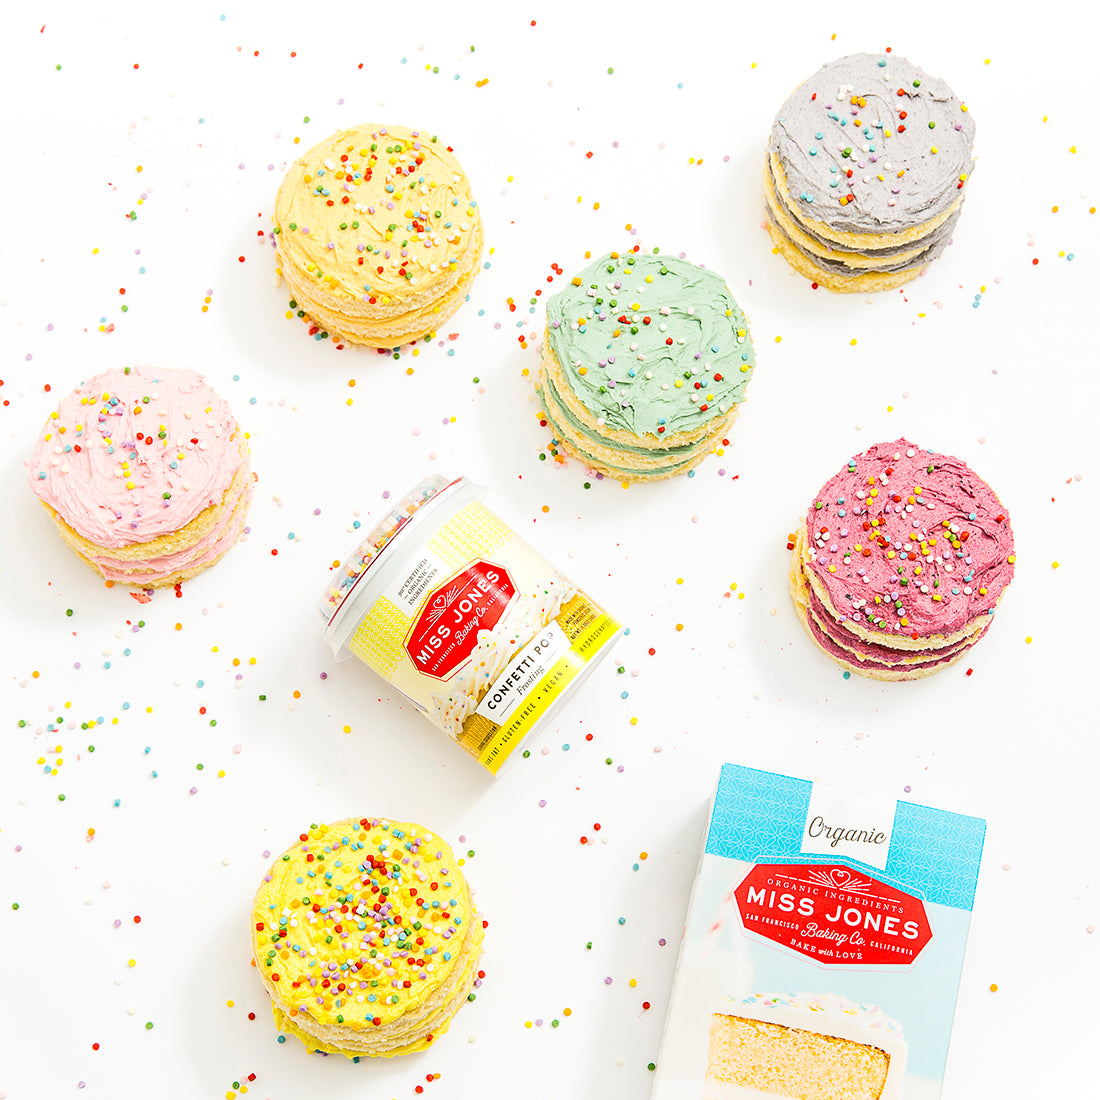 Image from above of Miss Jones Baking Co Rainbow Cakelets next to a jar of Miss Jones Cream Cheese Frosting and a box of Miss Jones Vanilla Cake Mix